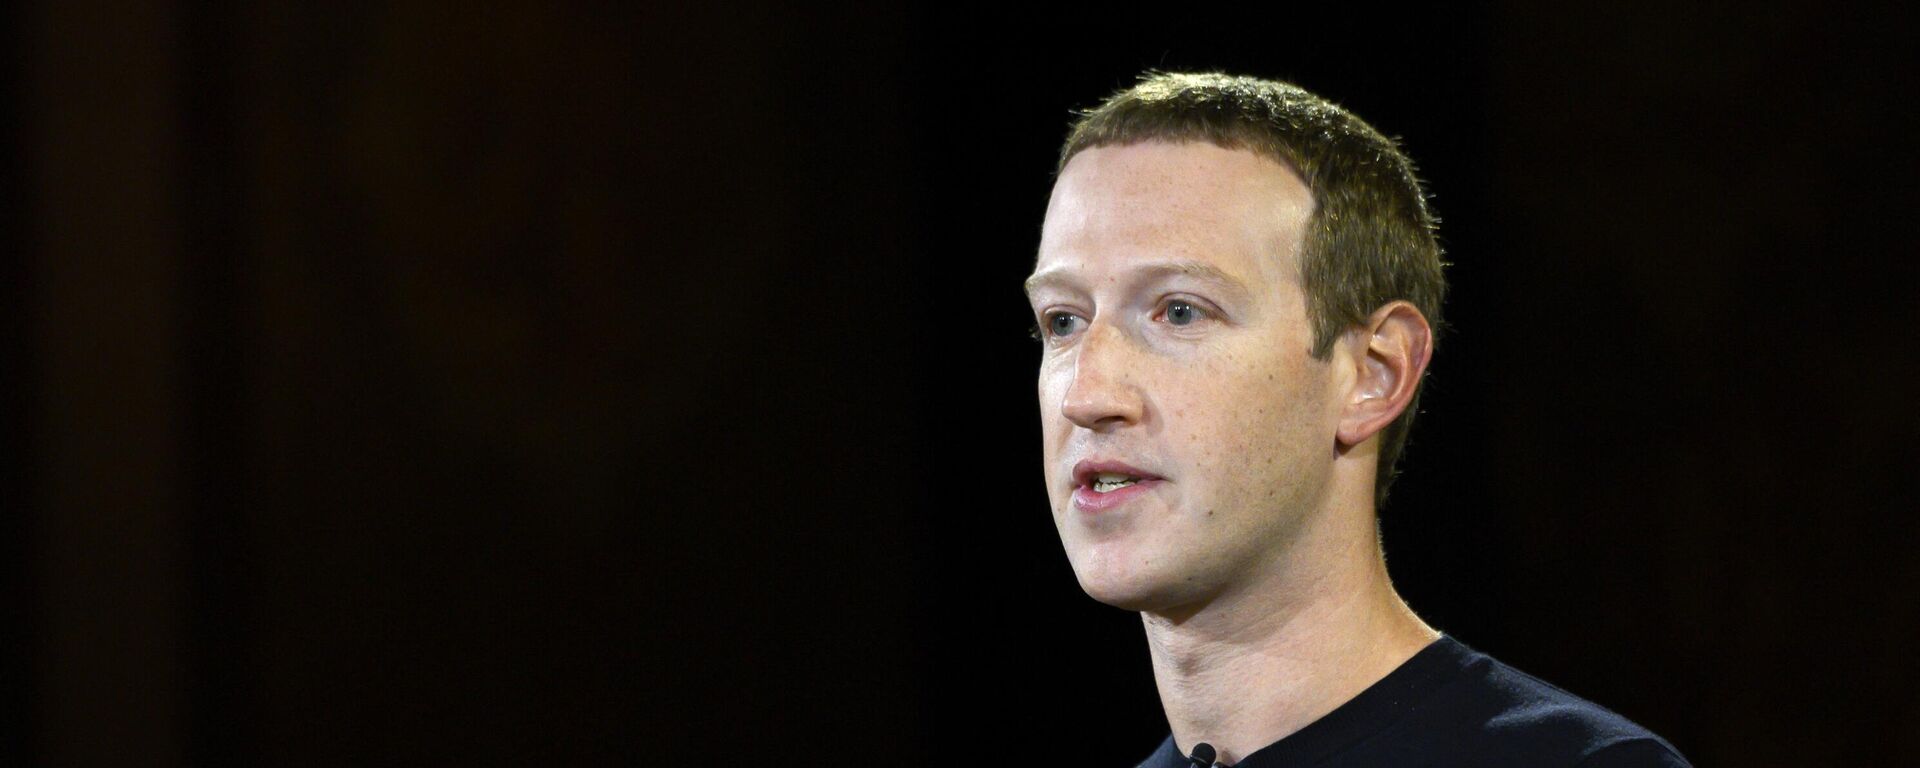 Facebook founder Mark Zuckerberg speaks at Georgetown University in a 'Conversation on Free Expression in Washington, DC on October 17, 2019. (Photo by ANDREW CABALLERO-REYNOLDS / AFP) - Sputnik International, 1920, 06.07.2023